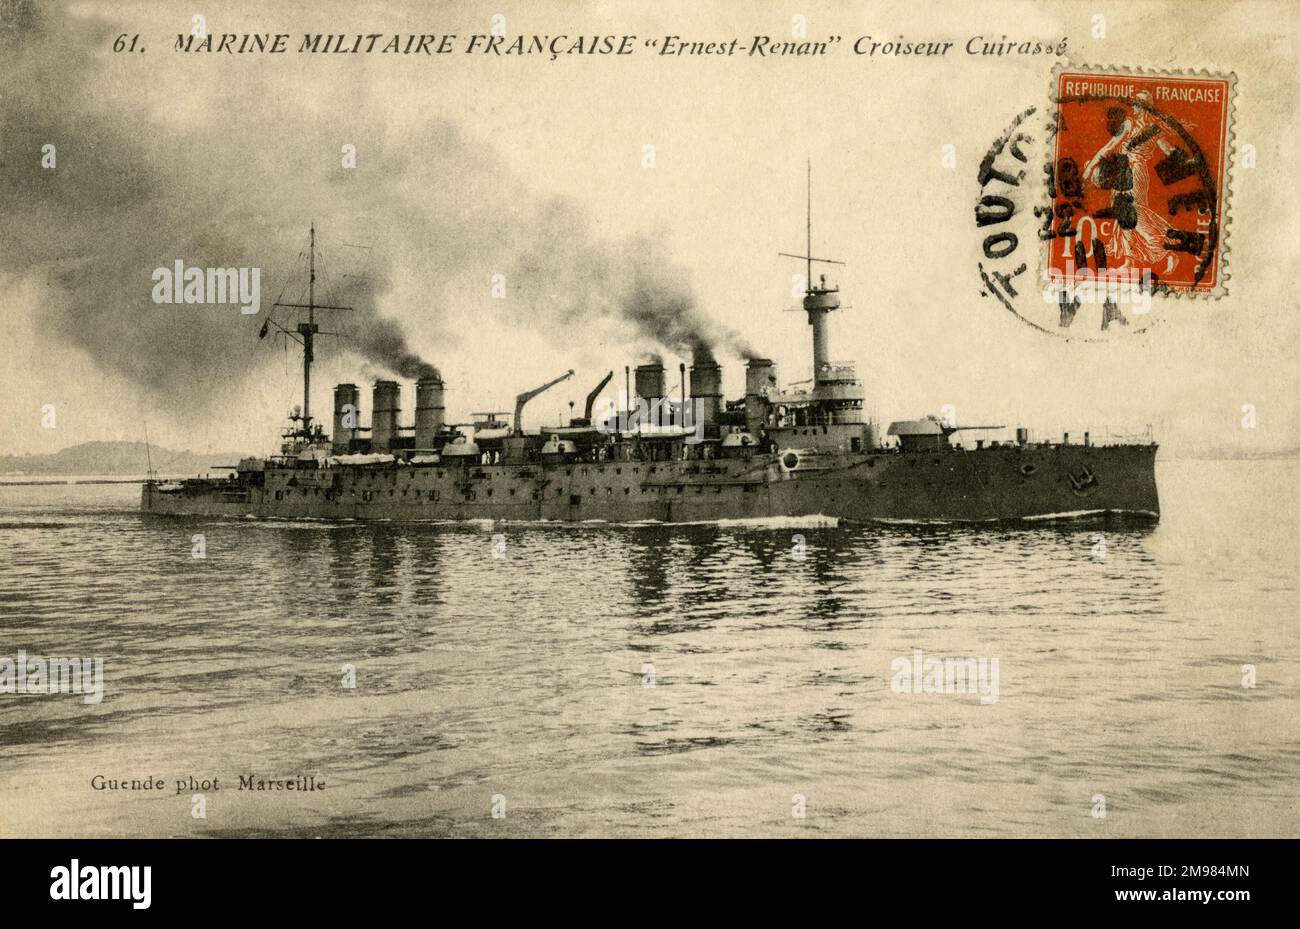 Marseilles, France - the French Navy's armoured cruiser, Ernest-Renan, at sea. The ship was built at the beginning of the 20th century and was used during WWI in the hunt for the German battleship Goeben, as well as during the Austro-Hungarian Naval blockade, the Battle of Antivari and the seizure of Corfu in 1916. Stock Photo